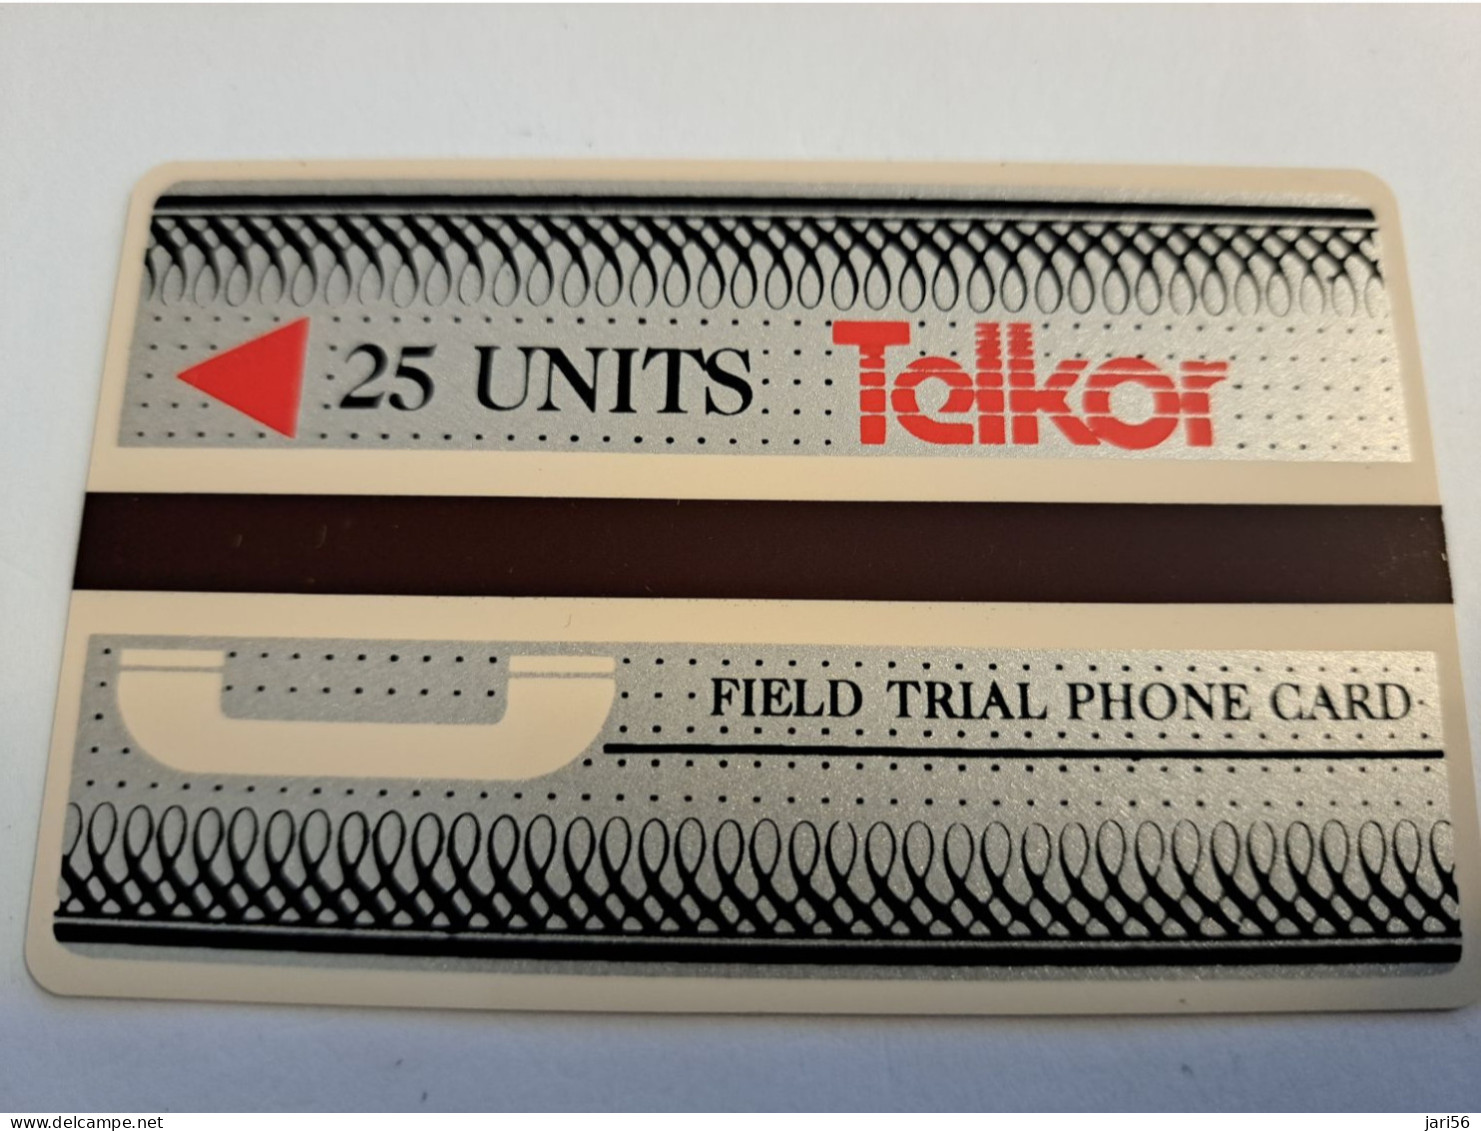 SOUTH AFRIKA  FIELD TRIAL CARD 25 UNITS TELKOR Red Arrow     1CARD Used **16048** - Suráfrica